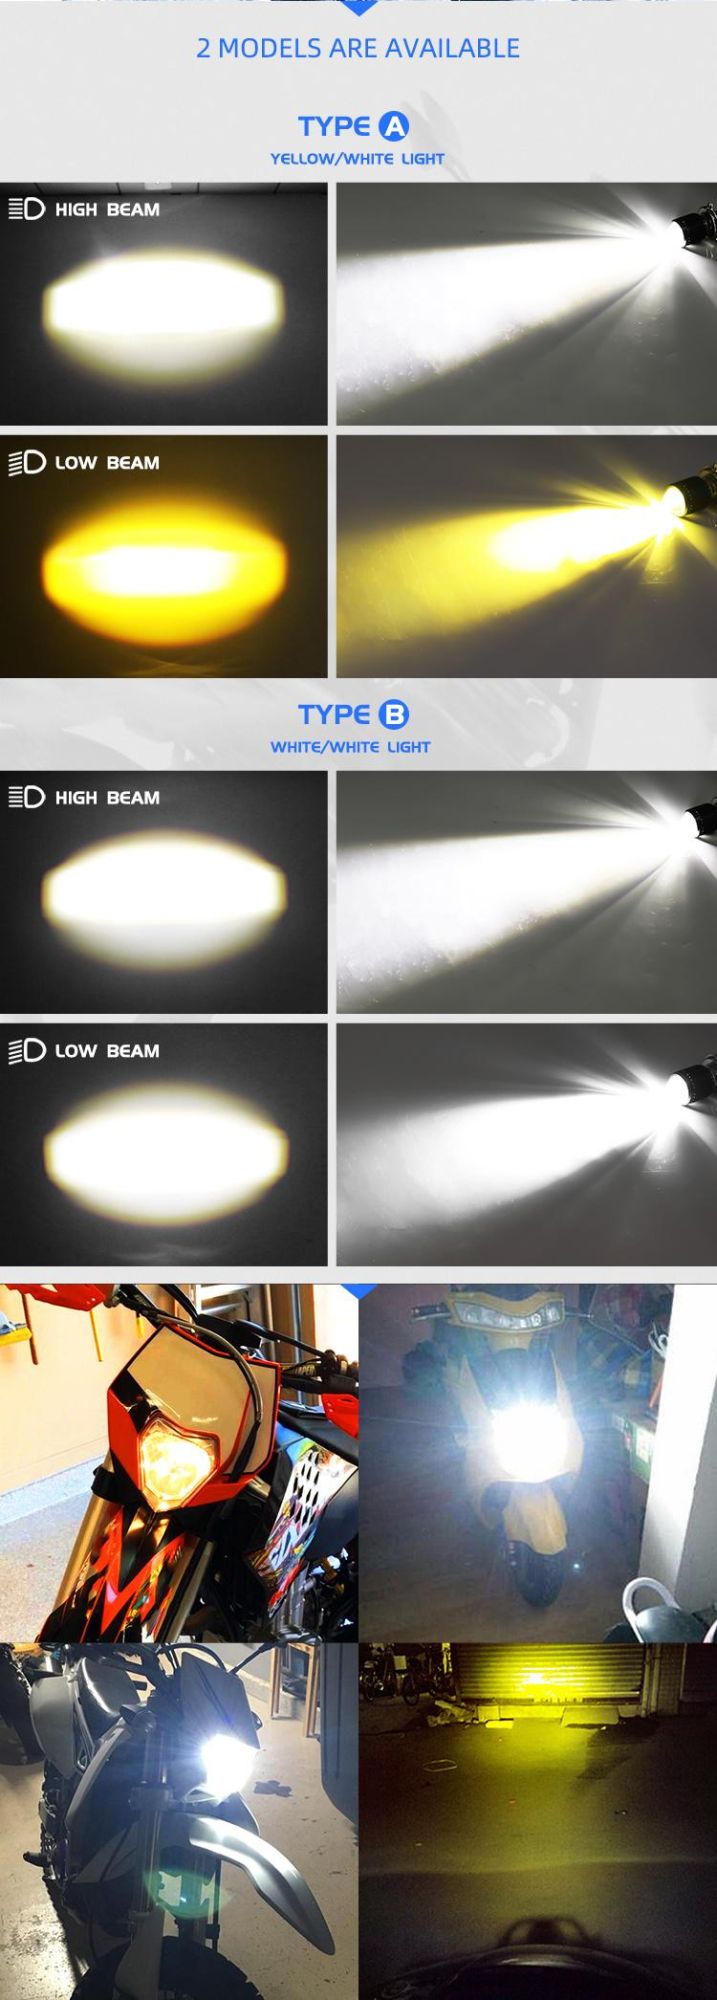 Motorcycle Lighting System Dual Color 4300K 6500K Mini 20W 1.25 Inch Fog Light H4 H6 HS1 Projector Lens LED Motorcycle Headlight